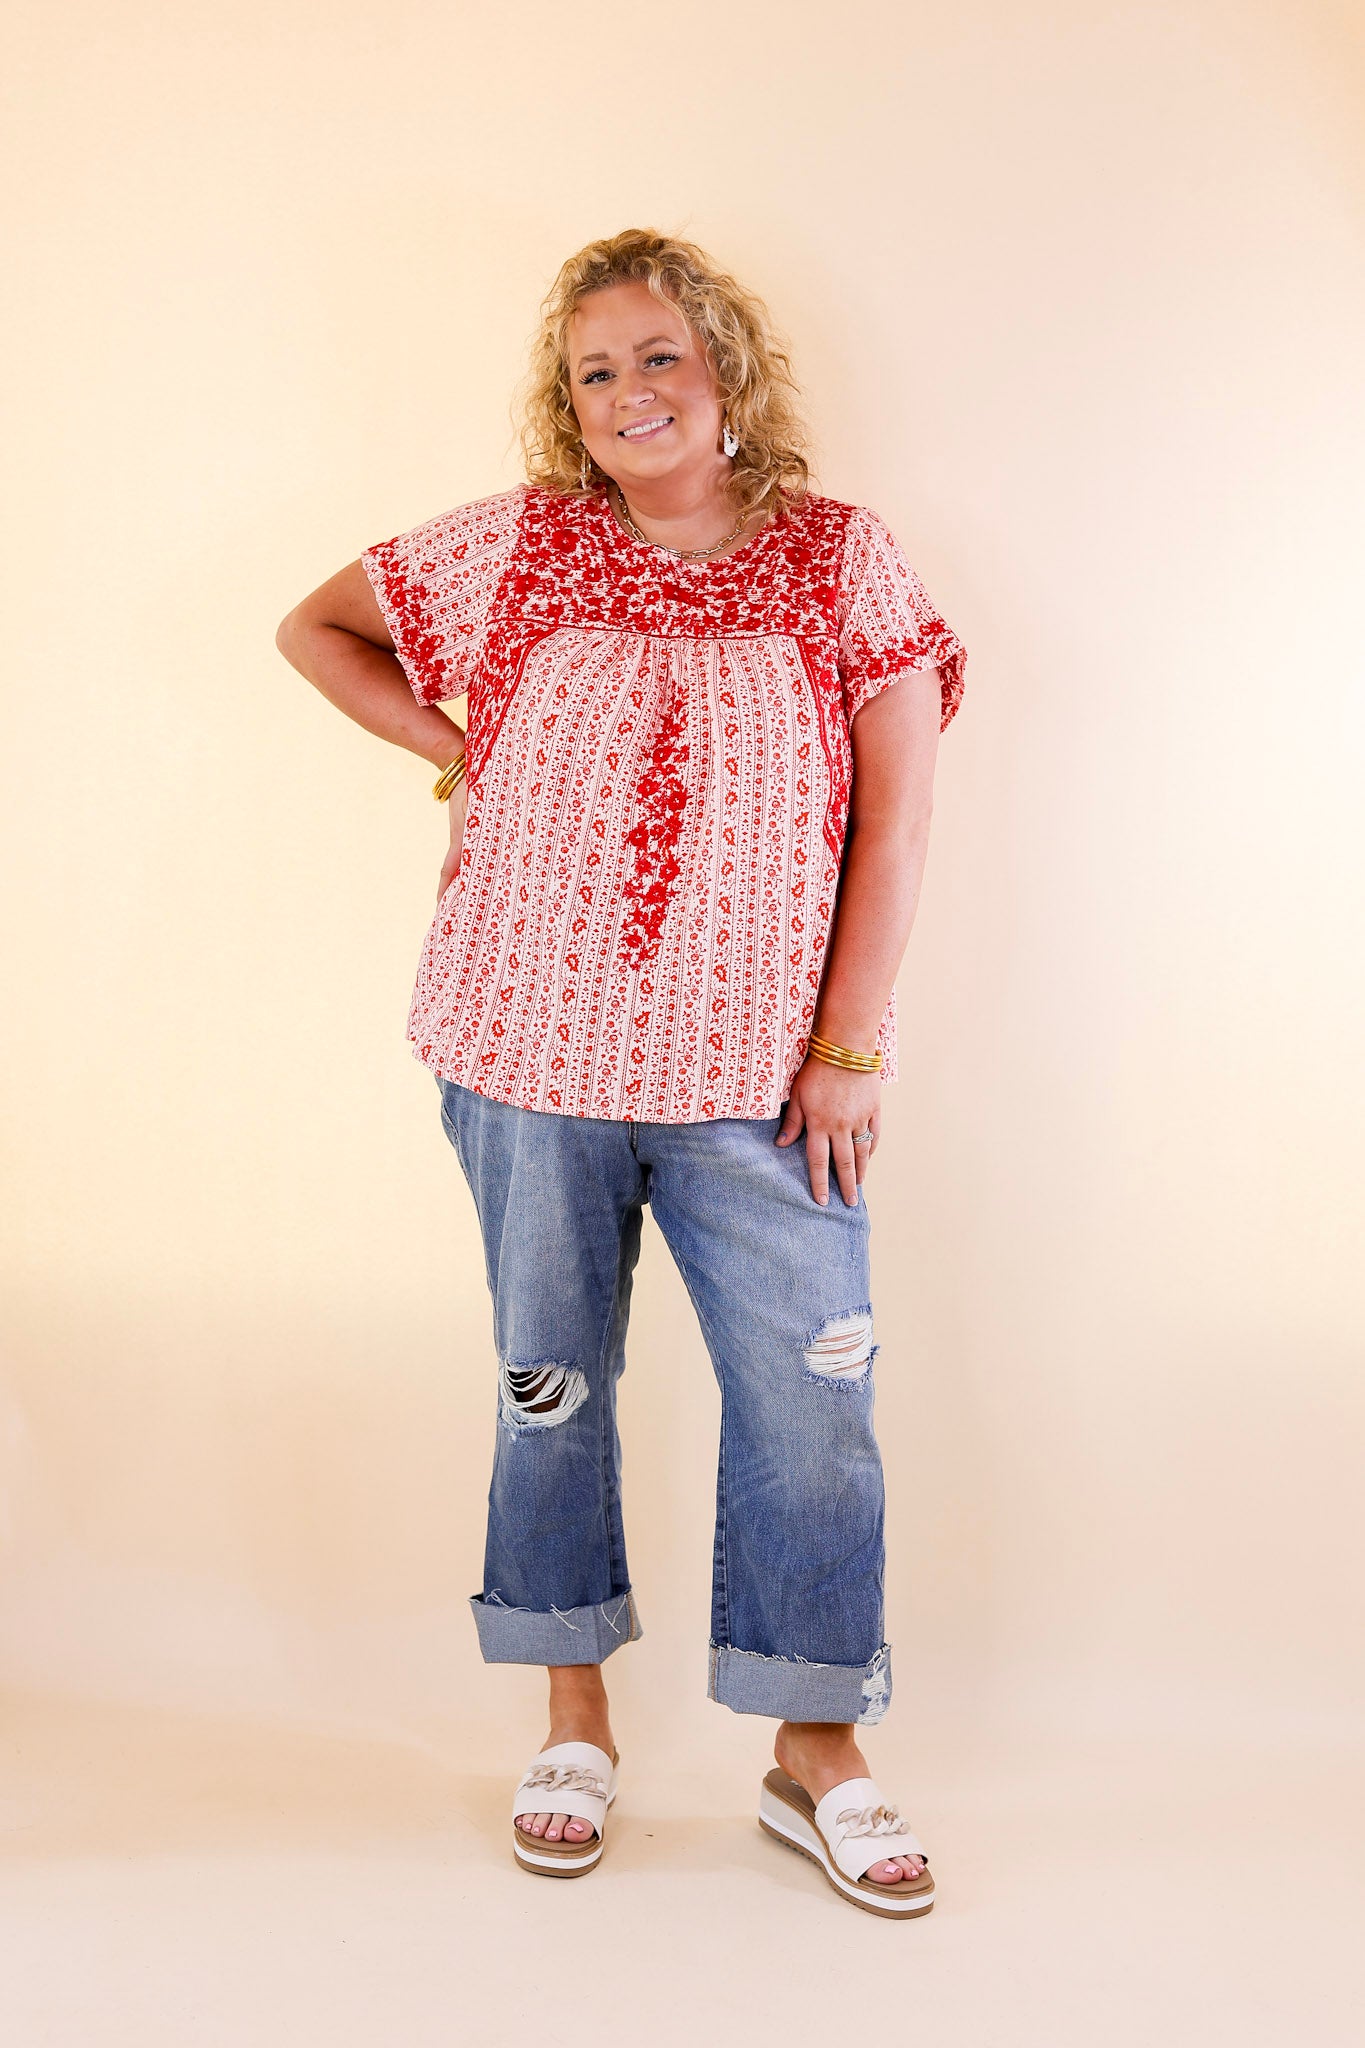 Sunny Day Floral Print Top with Red Floral Embroidery in Off White - Giddy Up Glamour Boutique